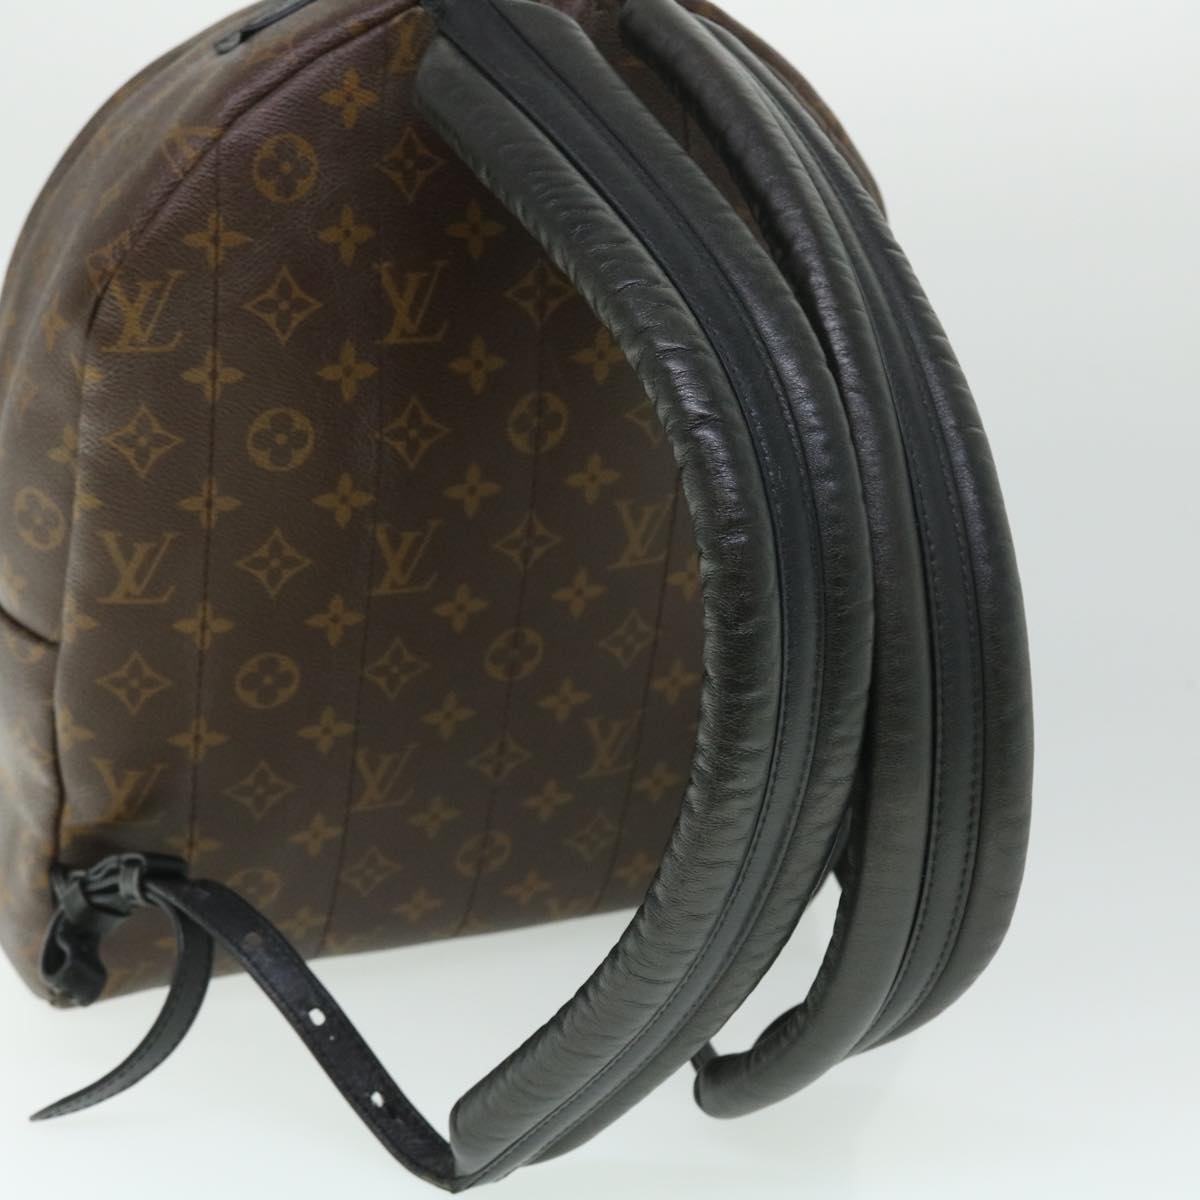 LOUIS VUITTON Monogram Palm Springs MM Backpack M44874 LV Auth 51798